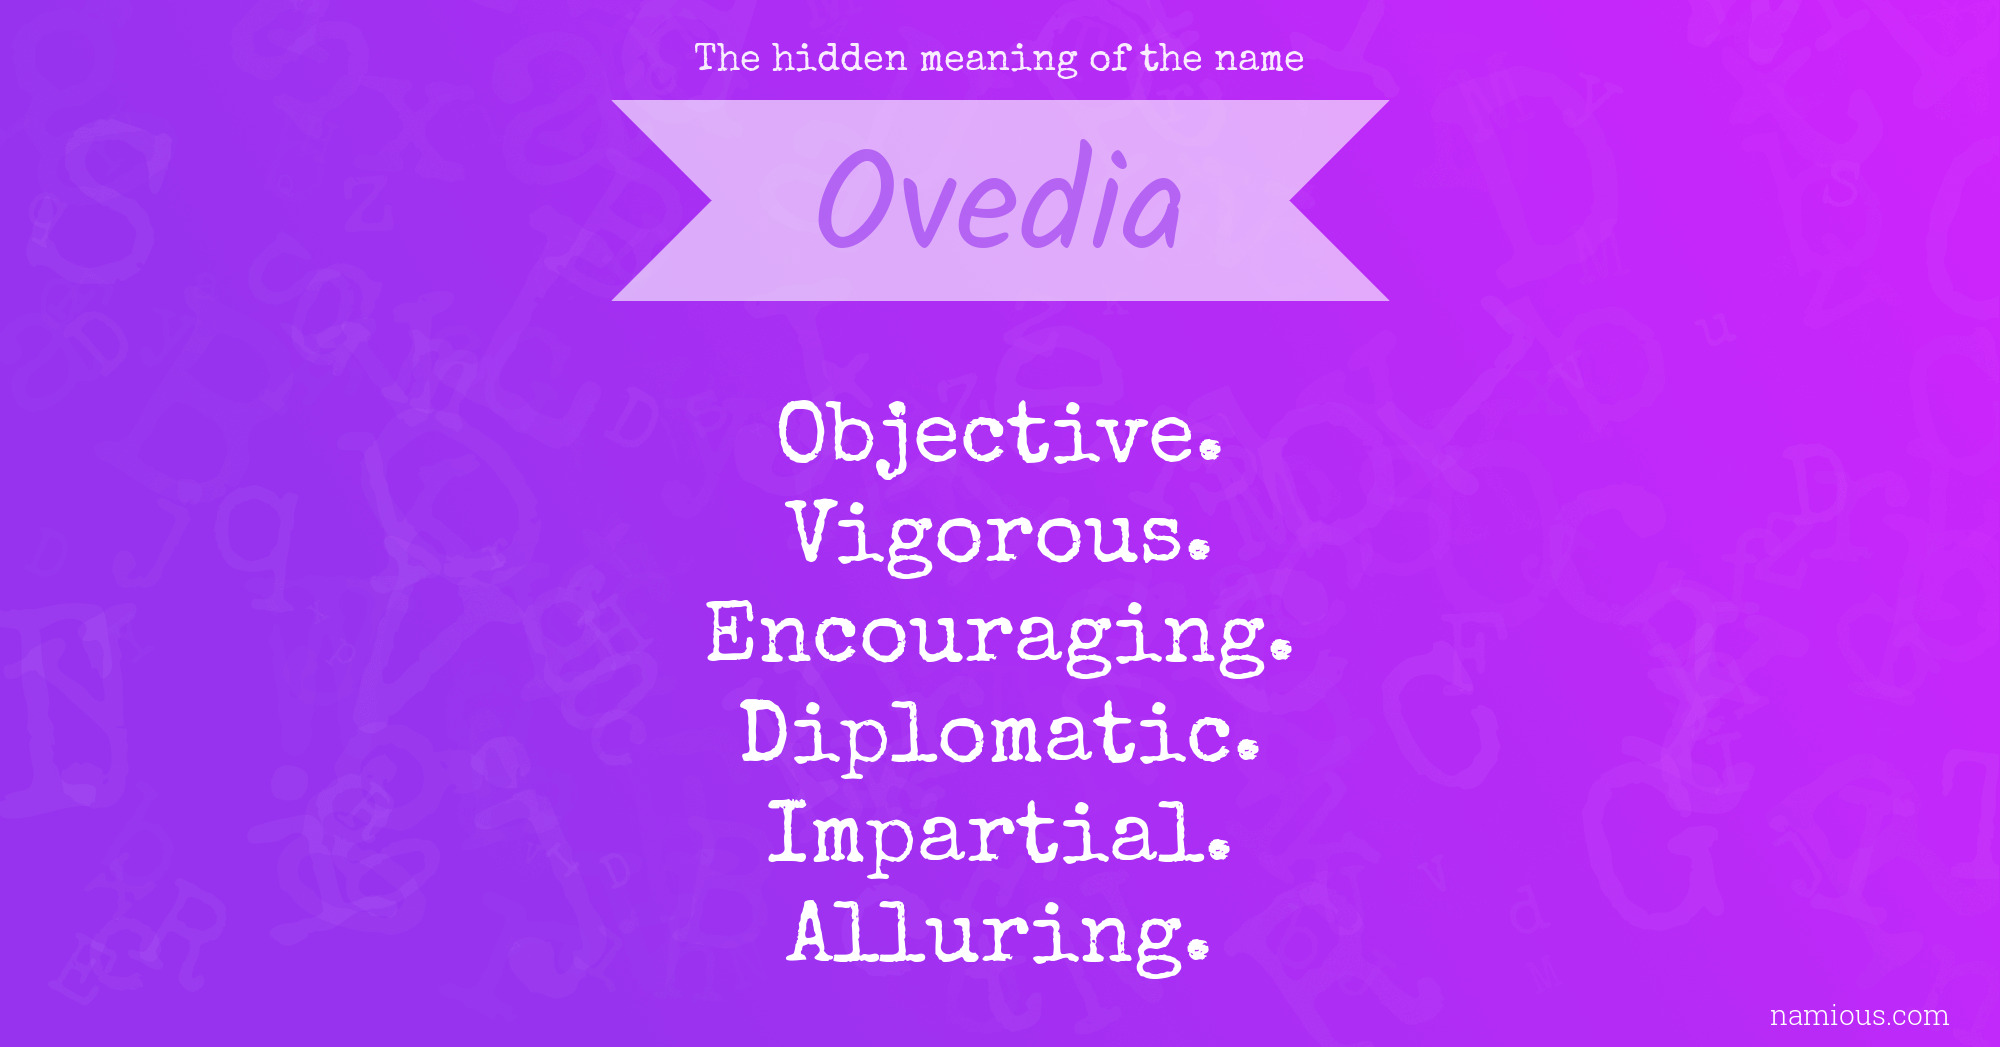 The hidden meaning of the name Ovedia